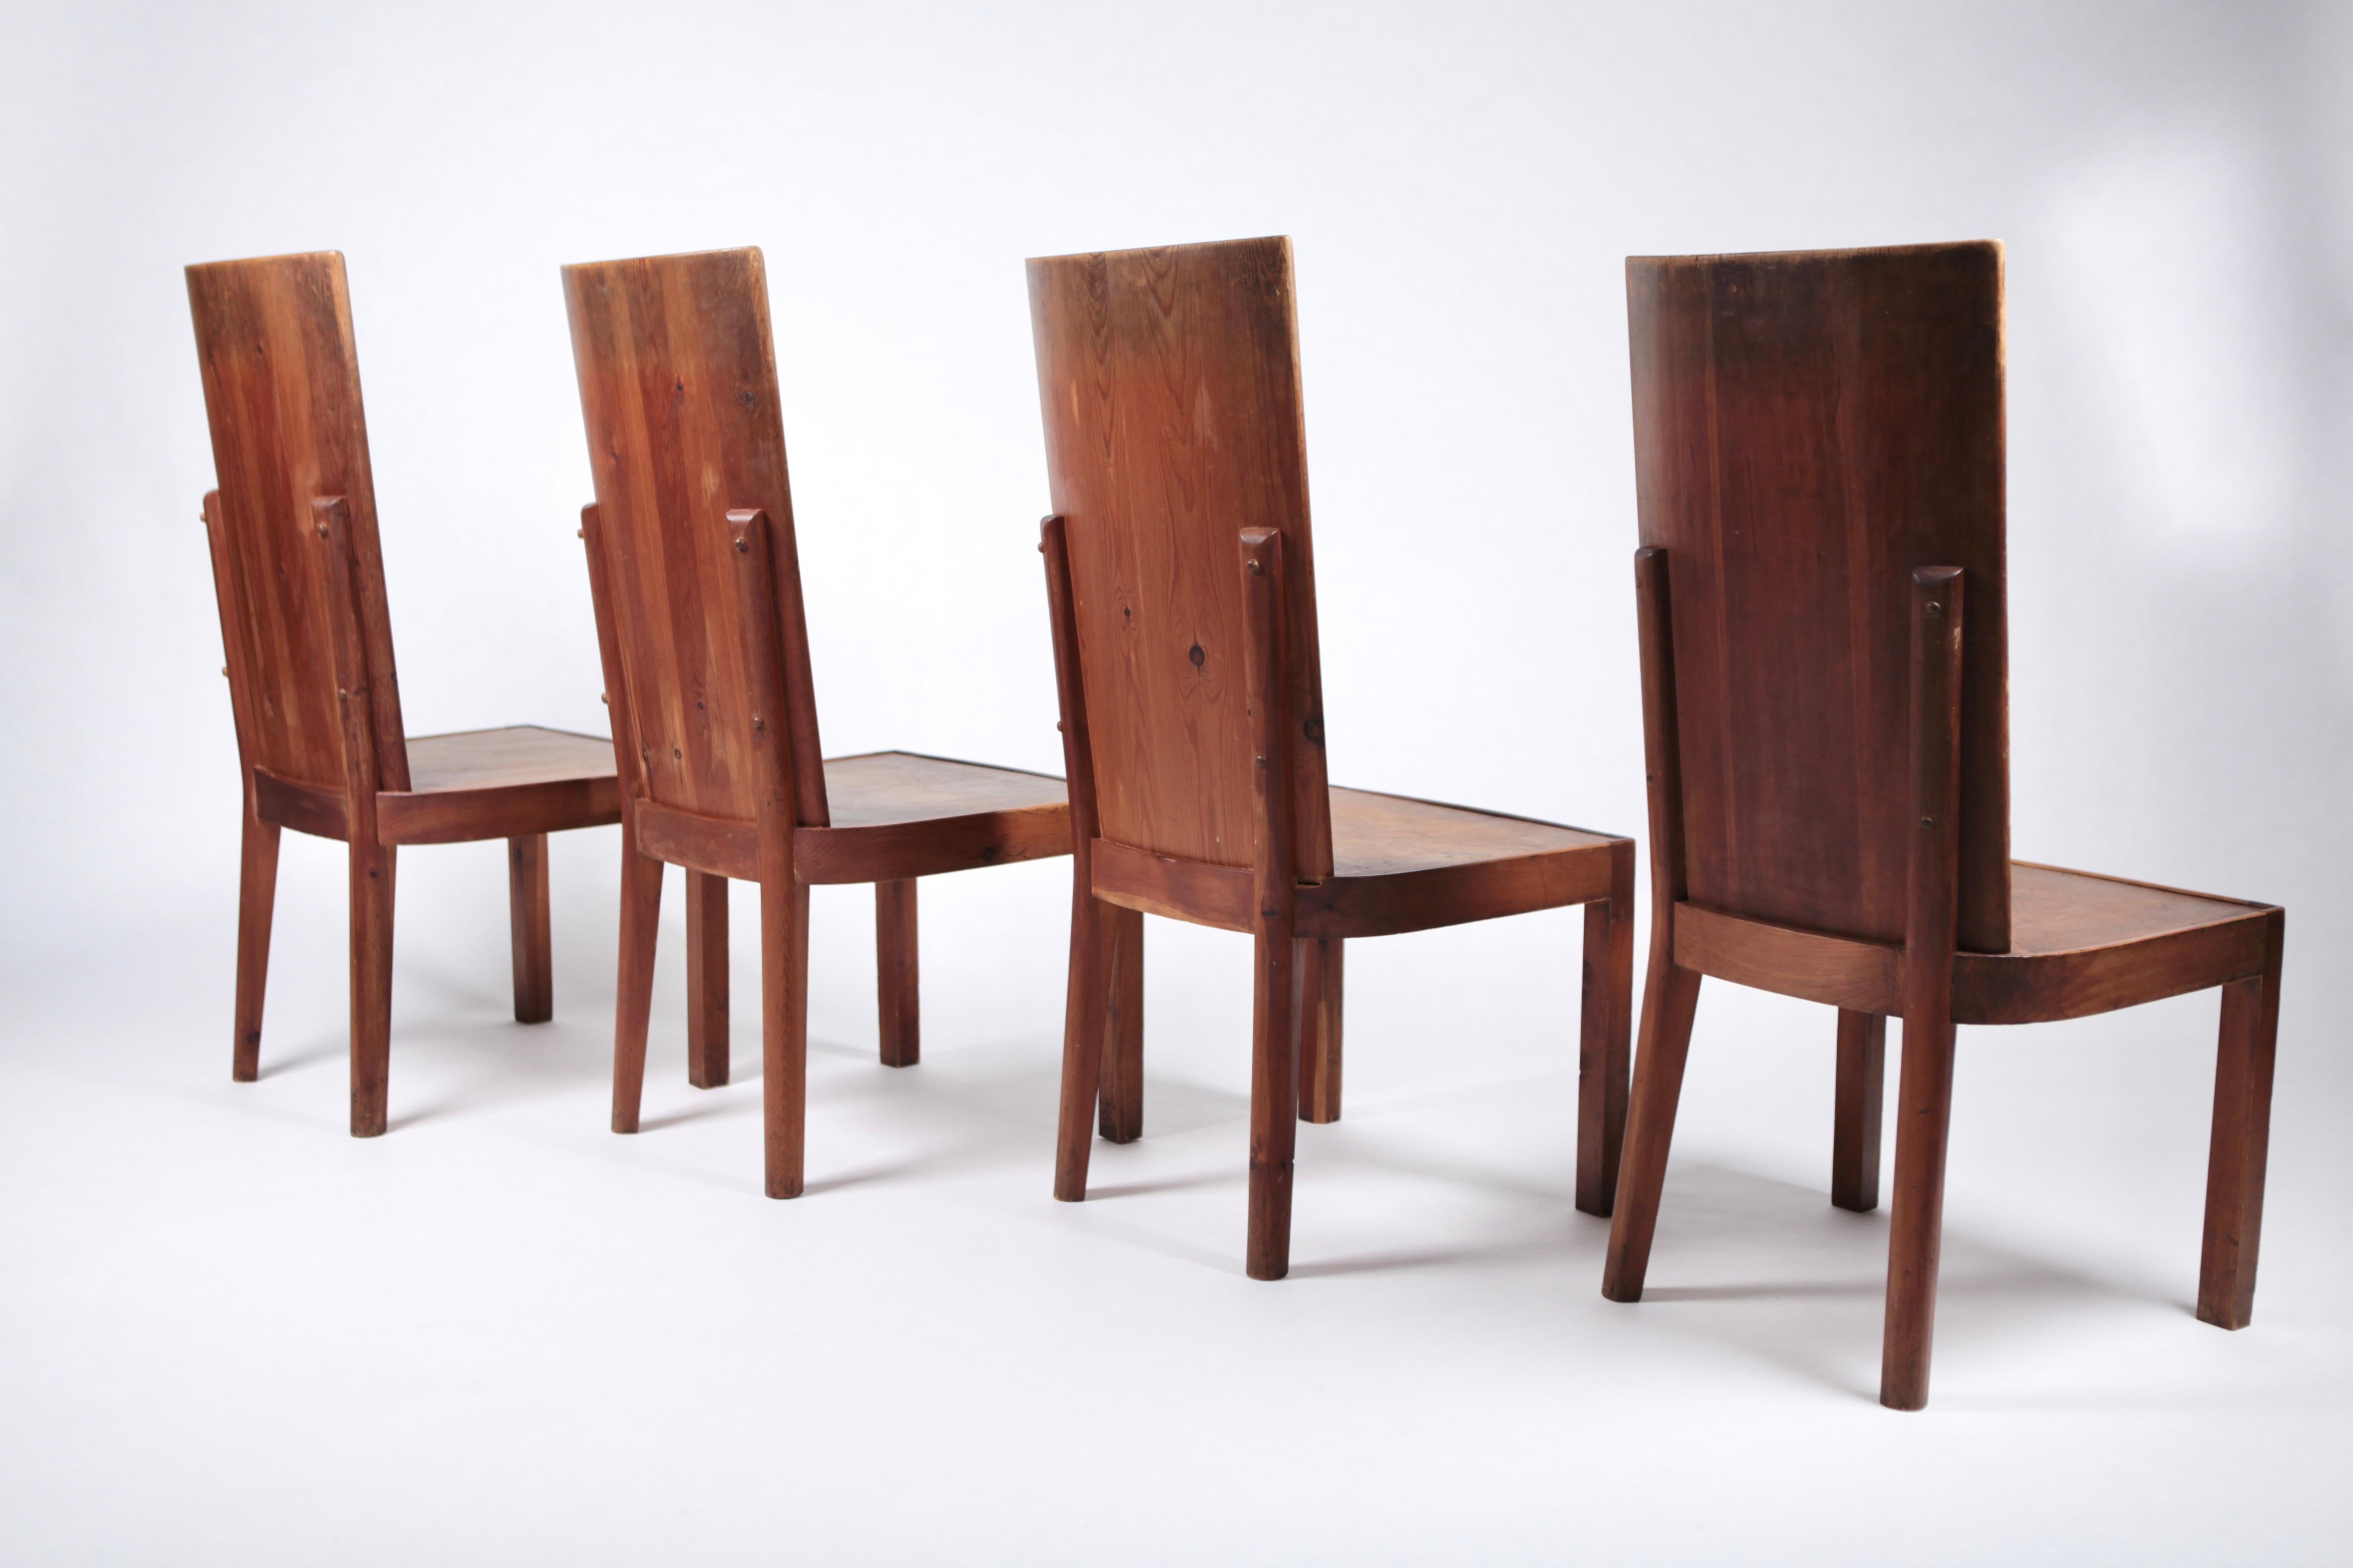 Mid-20th Century Set of 4 High Back Stained Pine Chairs, Attributed to Axel Einar Hjorth, Sweden  For Sale